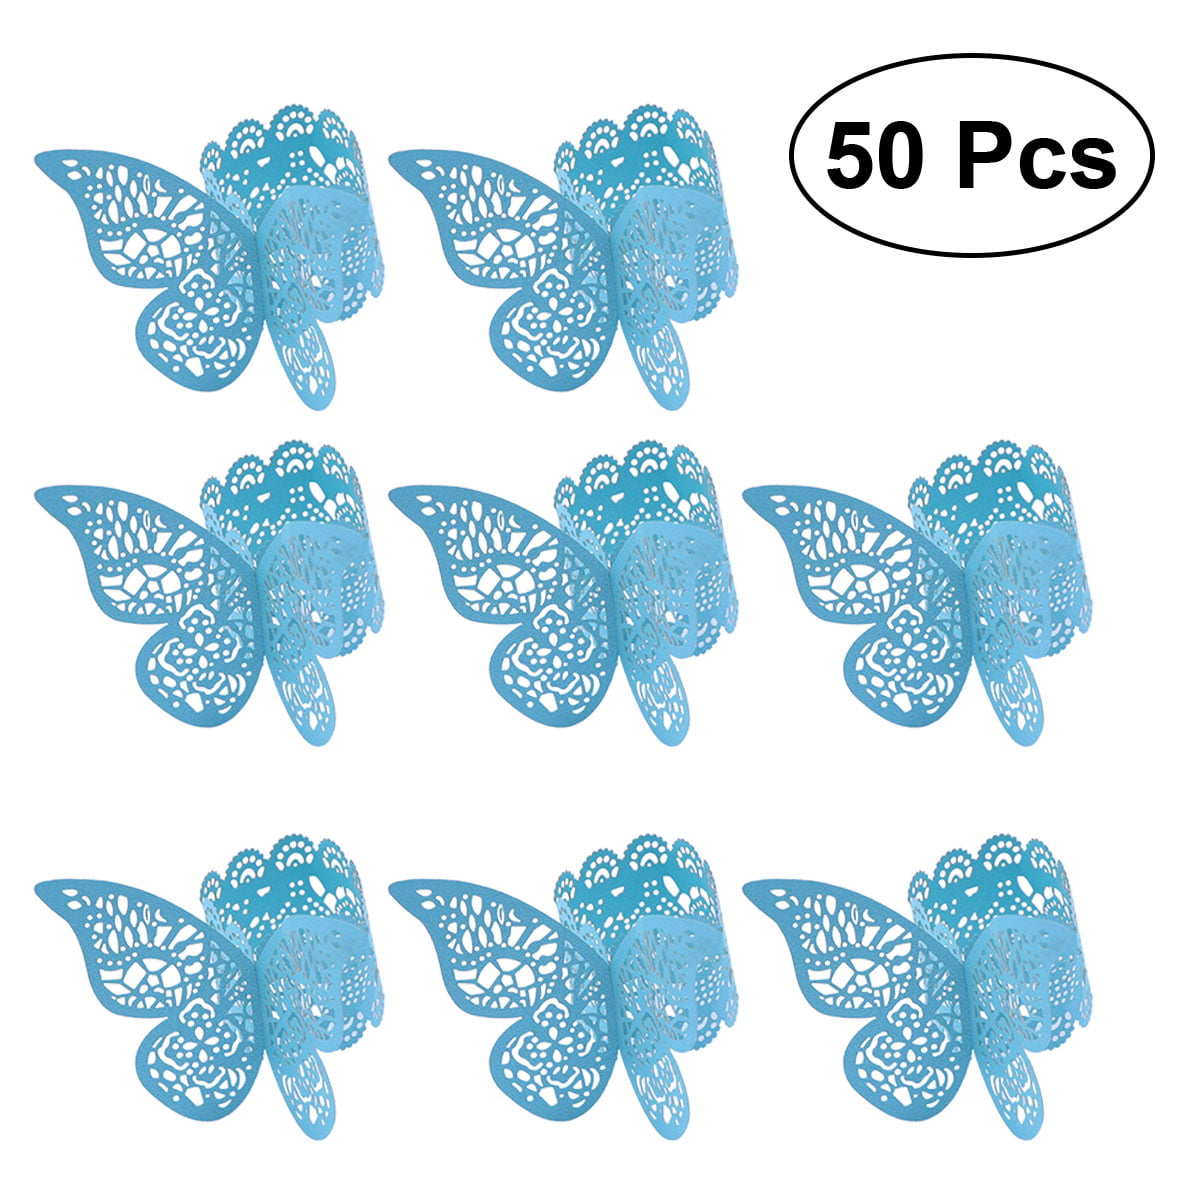 NUOLUX 50pcs Butterfly White Place Card Table Card for Wedding or Party Seat Card